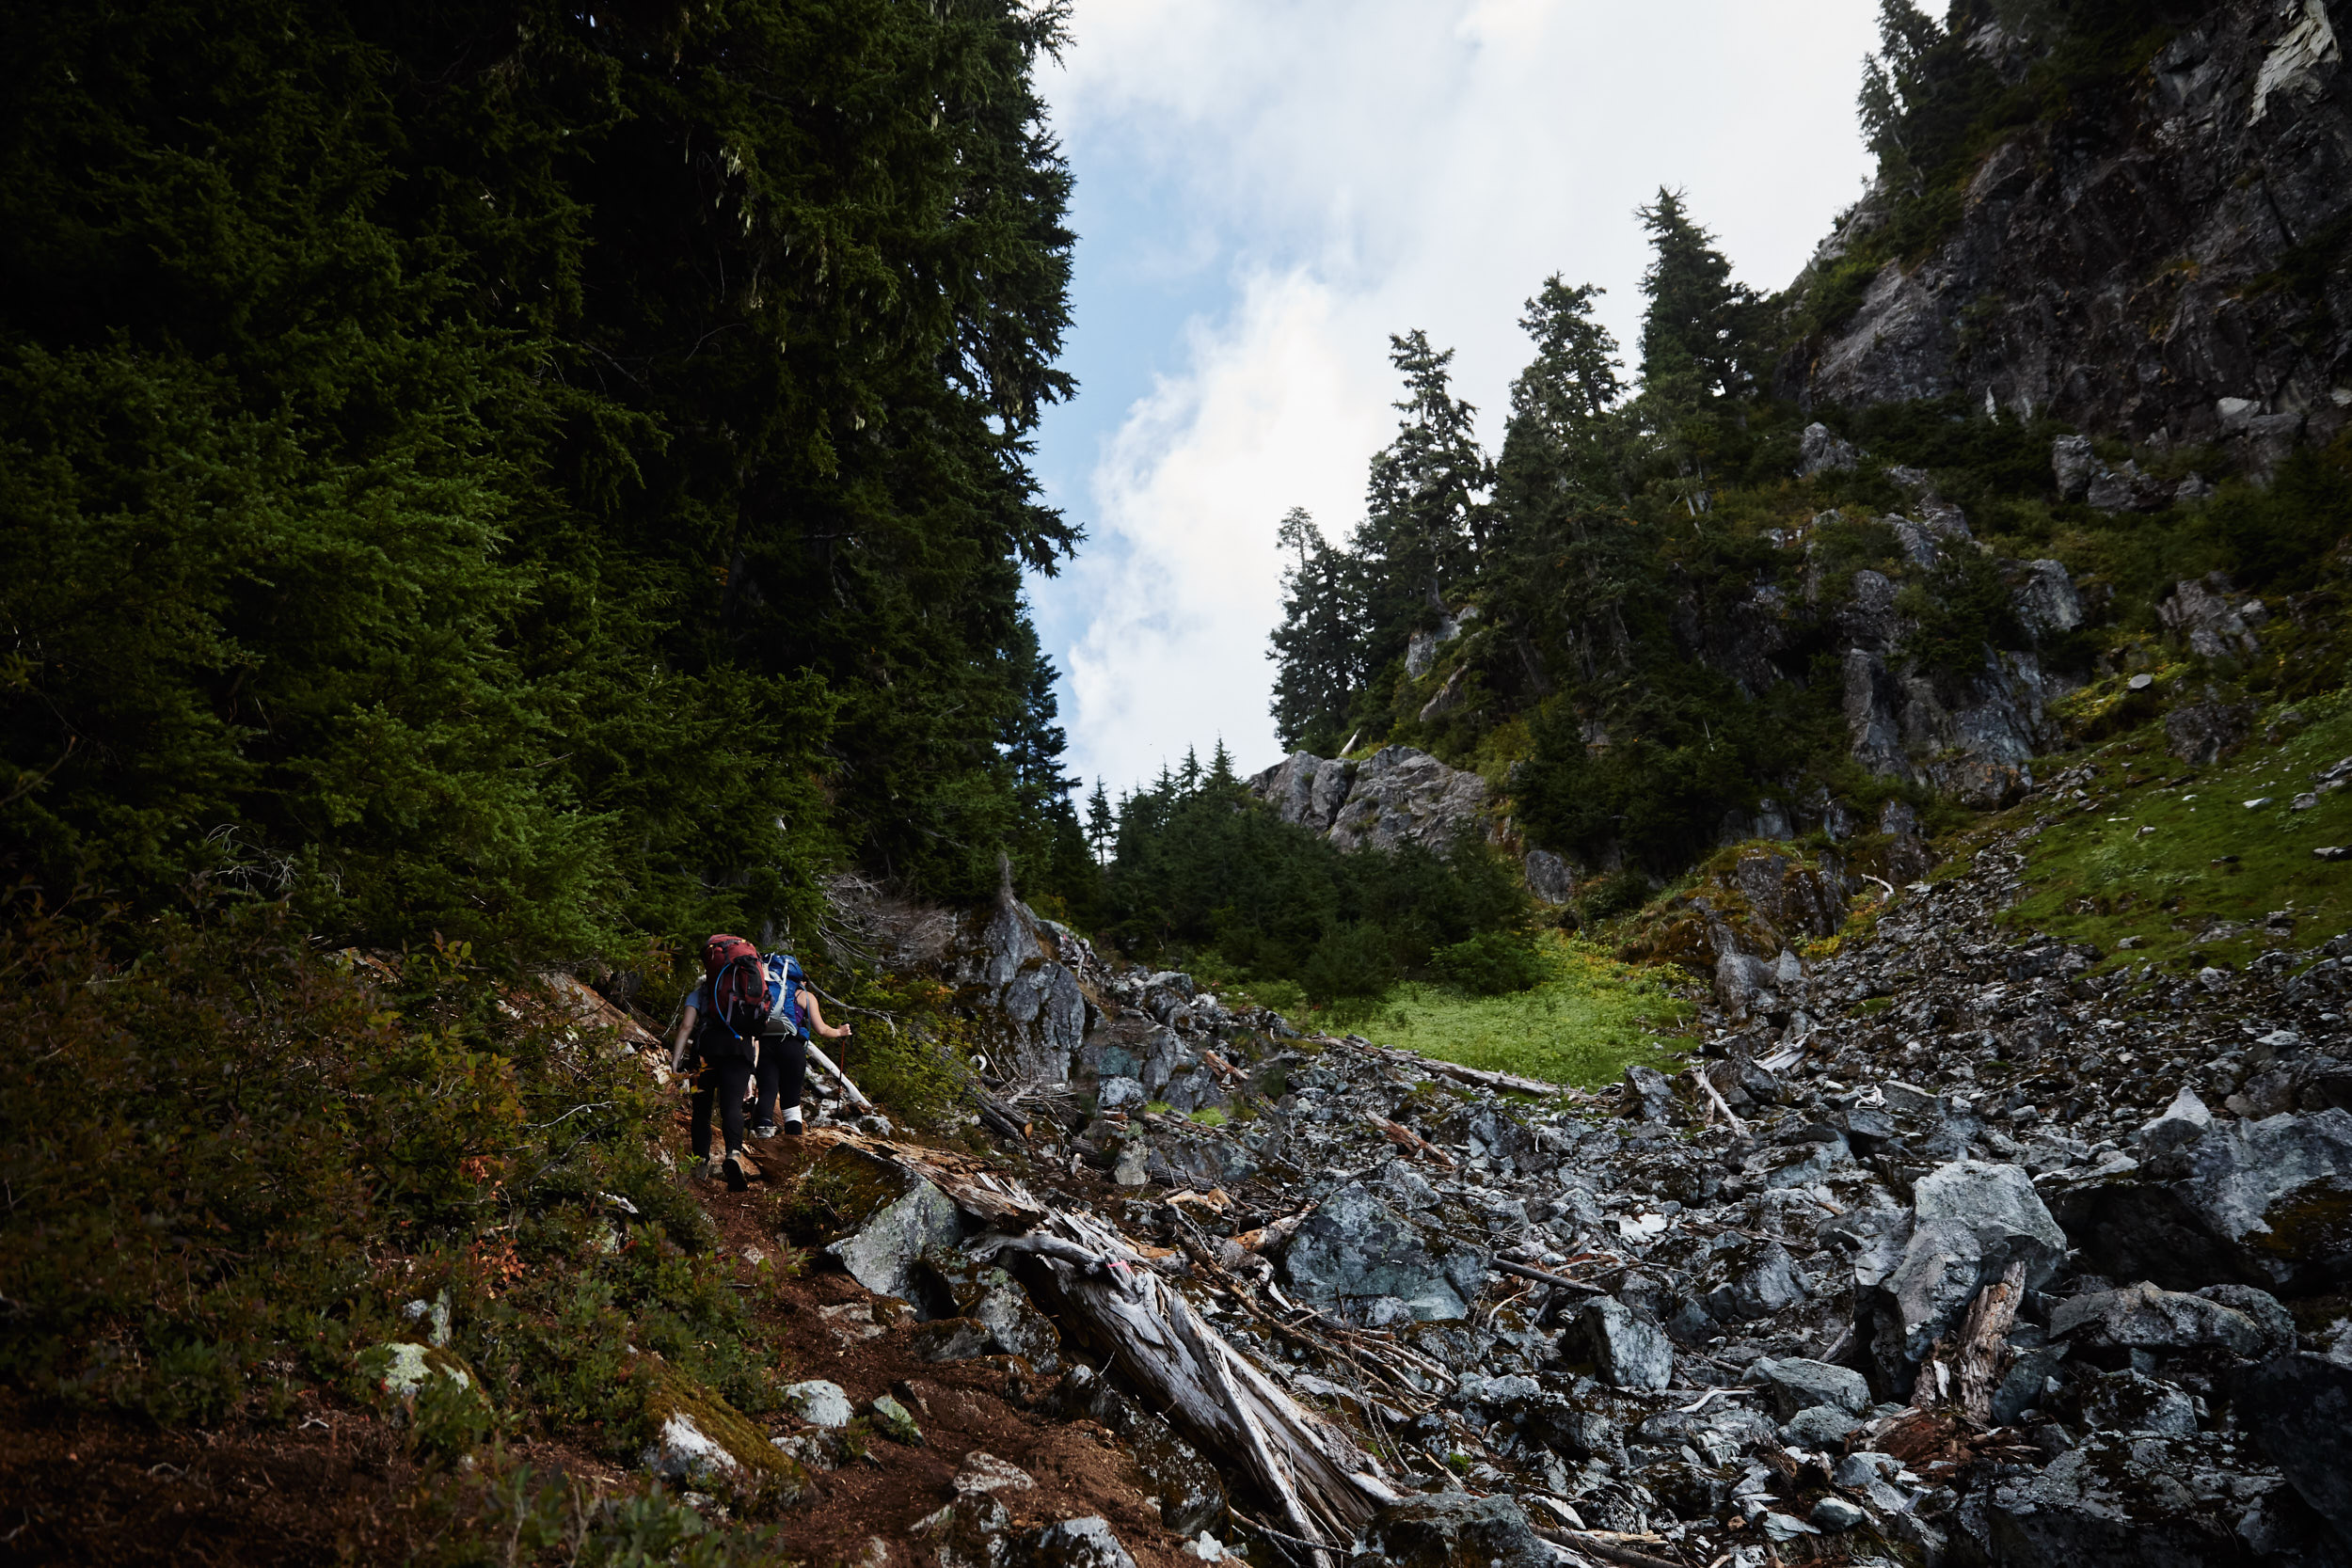  The last 200m has you hiking up a steep boulder field. 